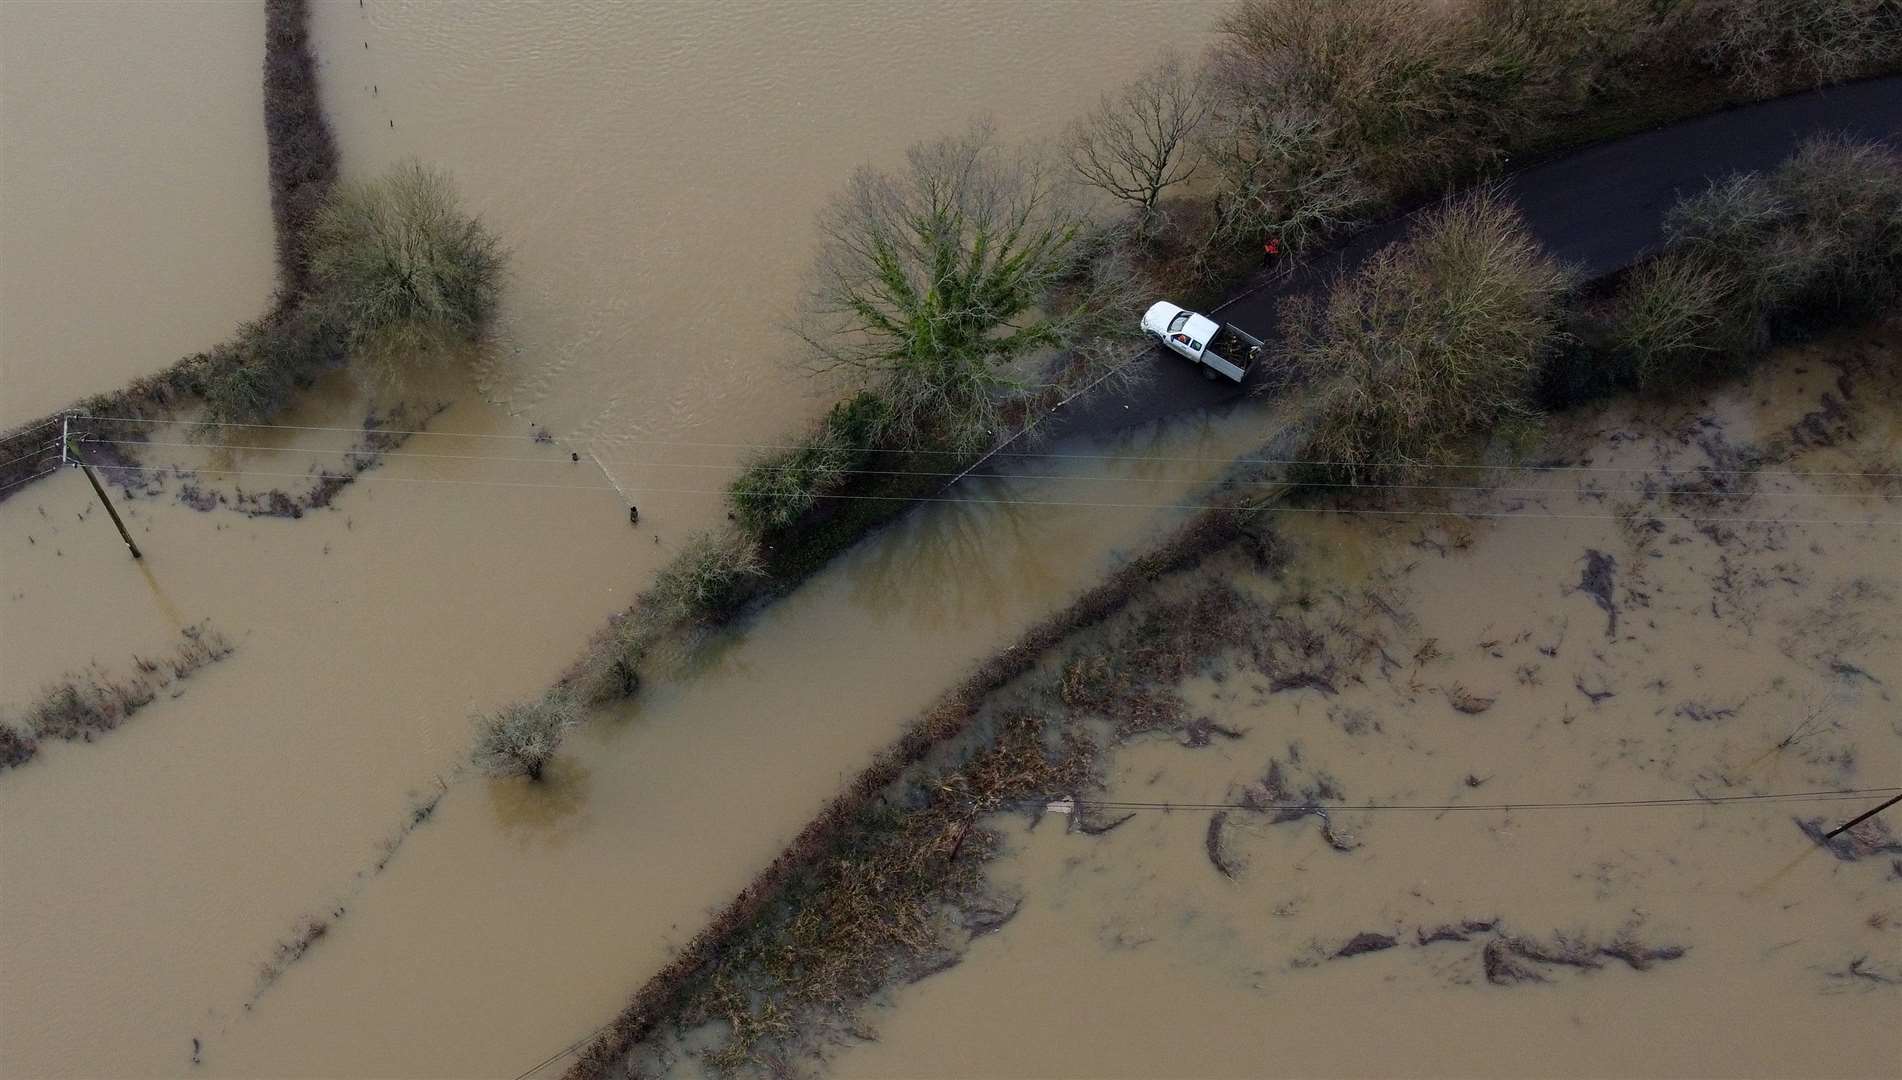 A van avoids flood water from the River Ouse in Barcombe Mills, East Sussex. (Gareth Fuller/PA)